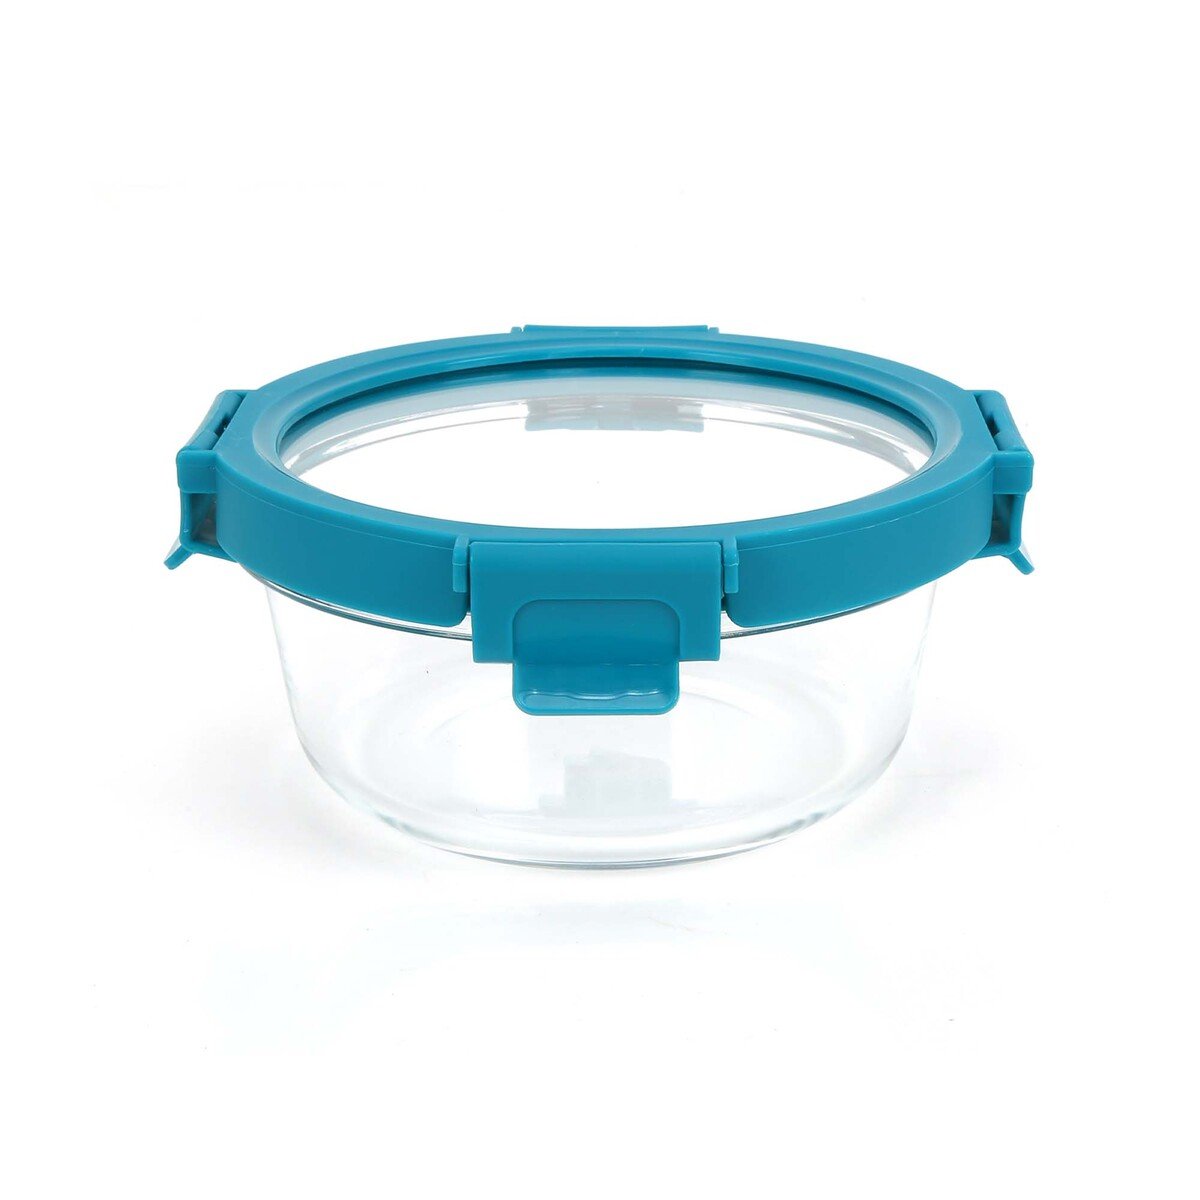 Chefline Round Food Storage Glass Container With Lid, Blue (Teal Blue), 950 ml